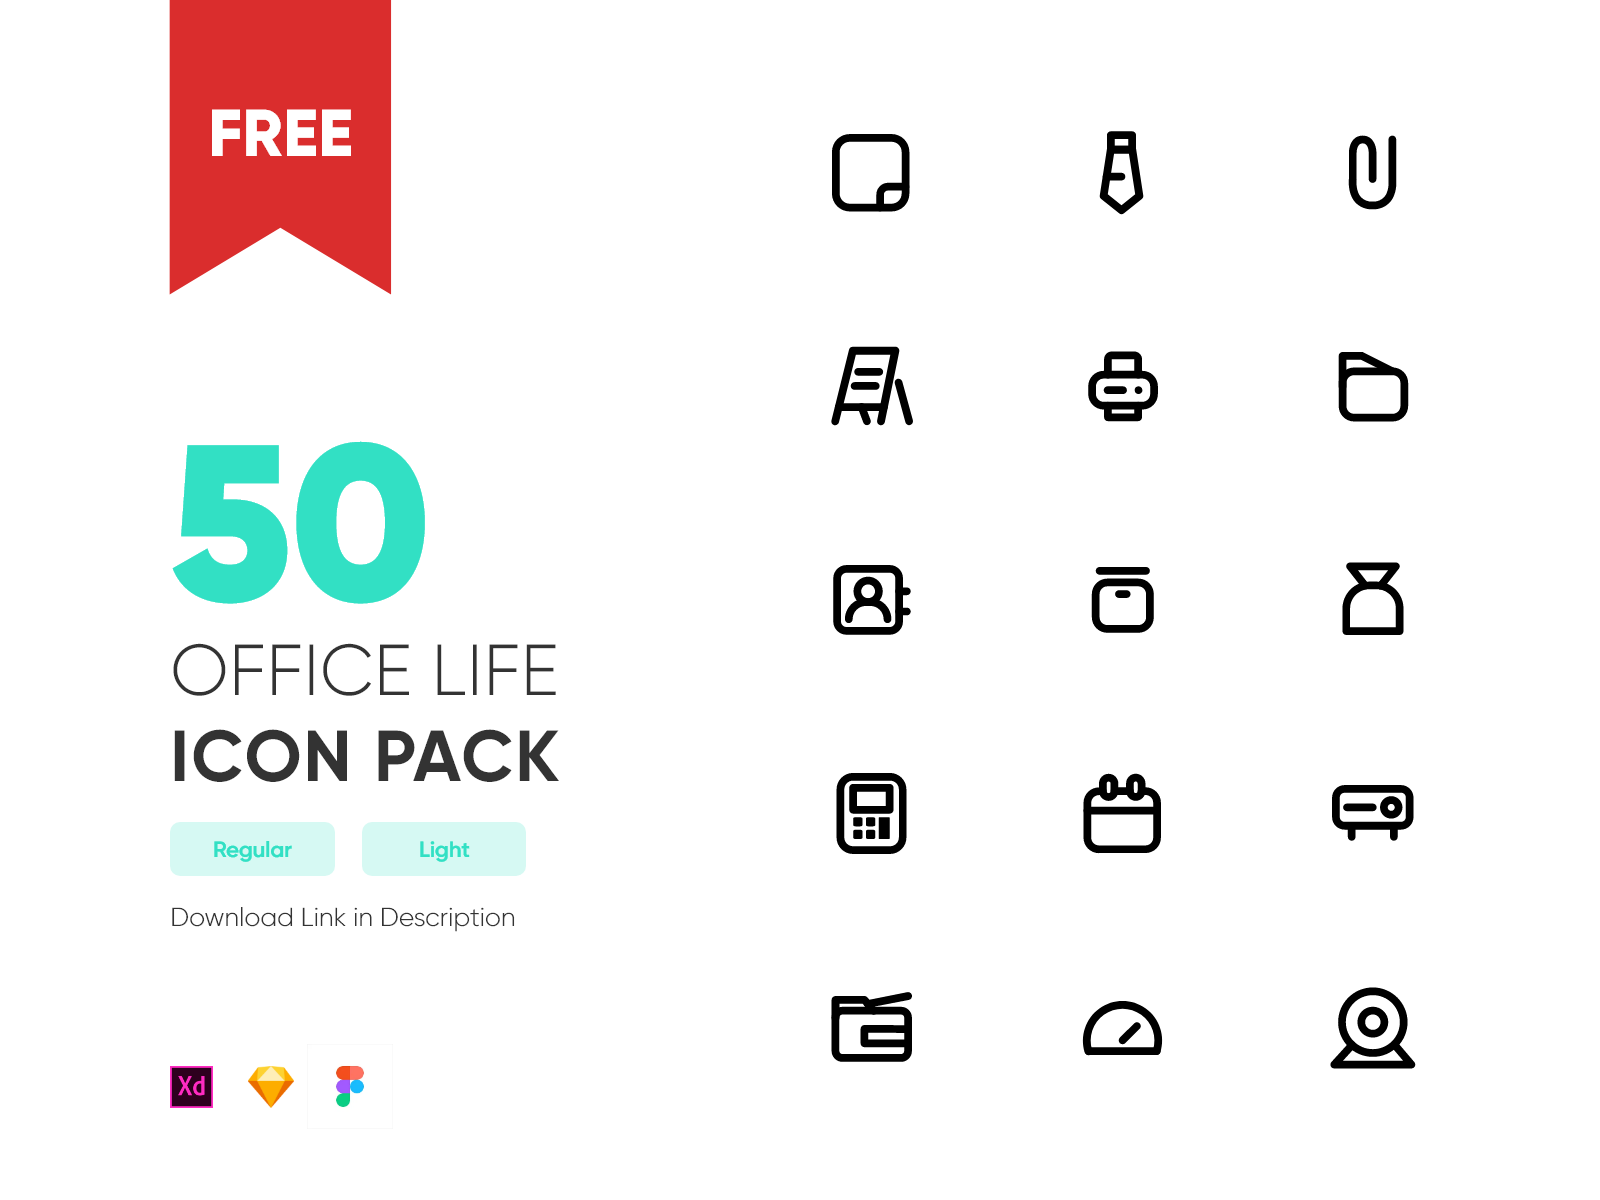 Free Office Life Icon Pack By kash Raj Dahal On Dribbble